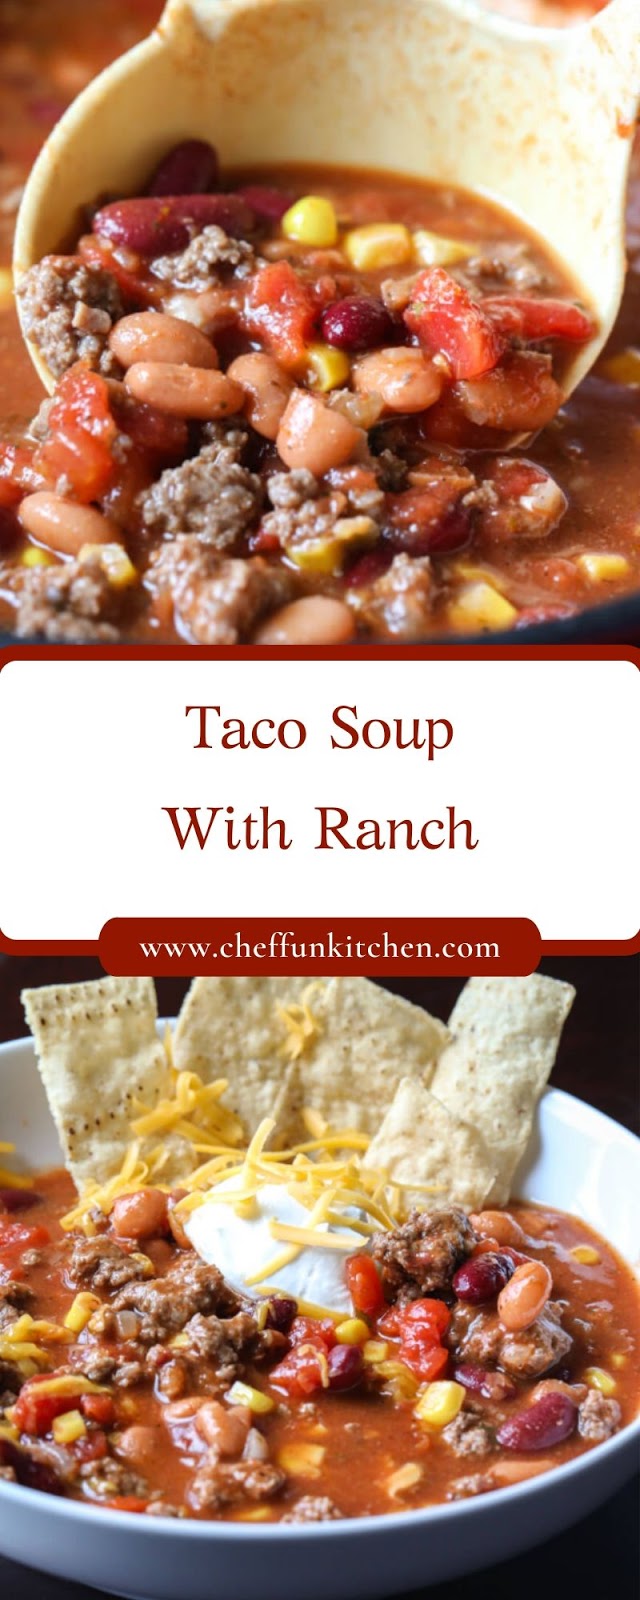 Taco Soup With Ranch